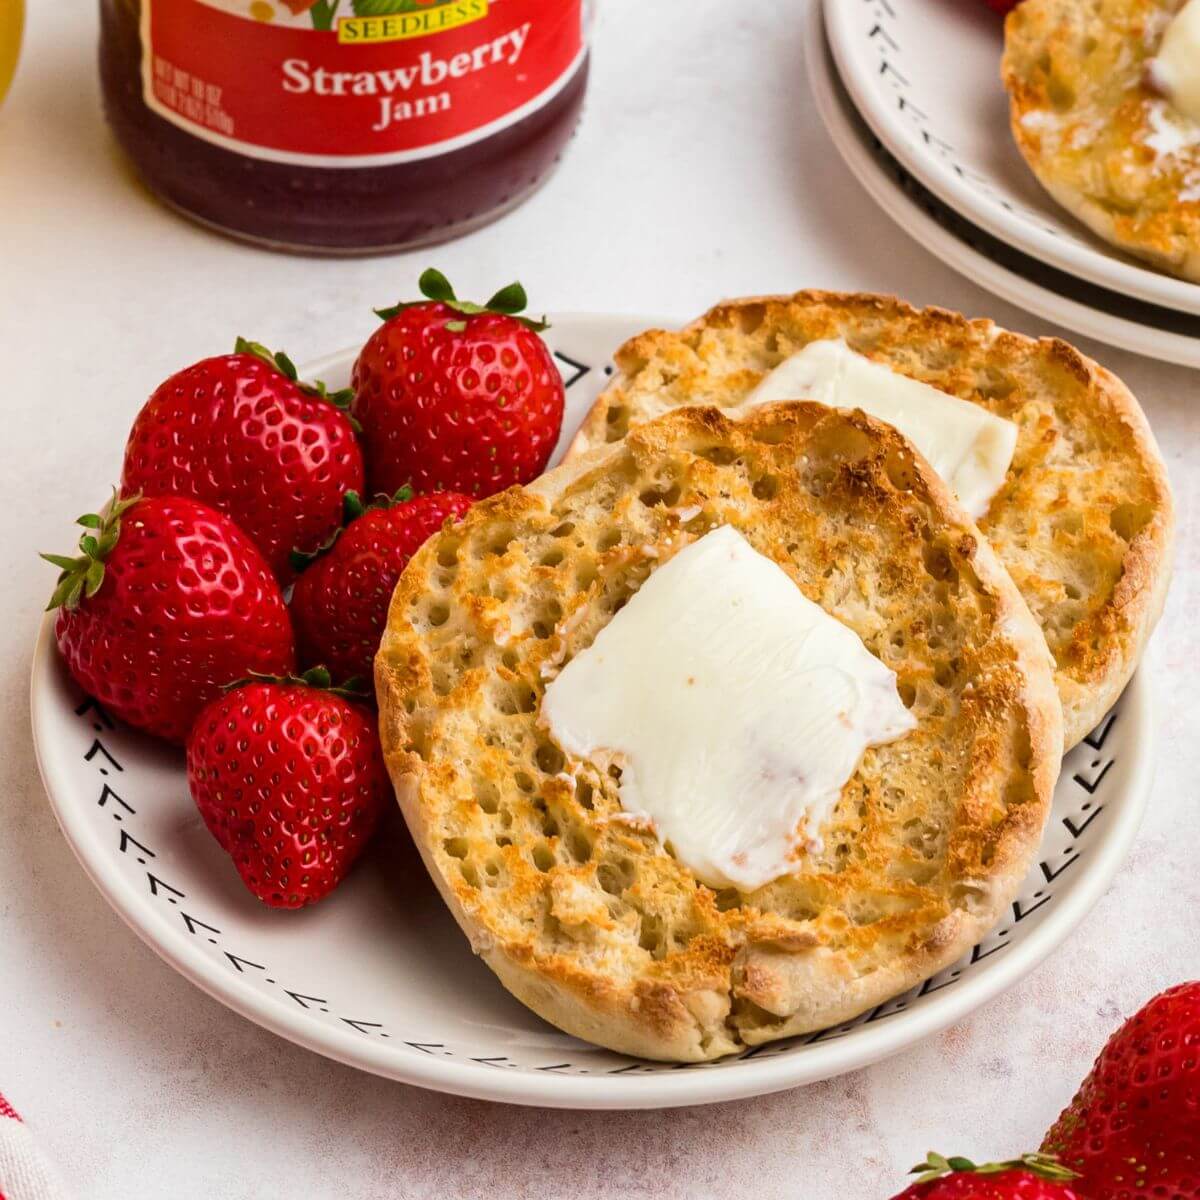 Golden crispy English muffins with a piece of butter on top, on a white plate served with strawberries and orange juice.